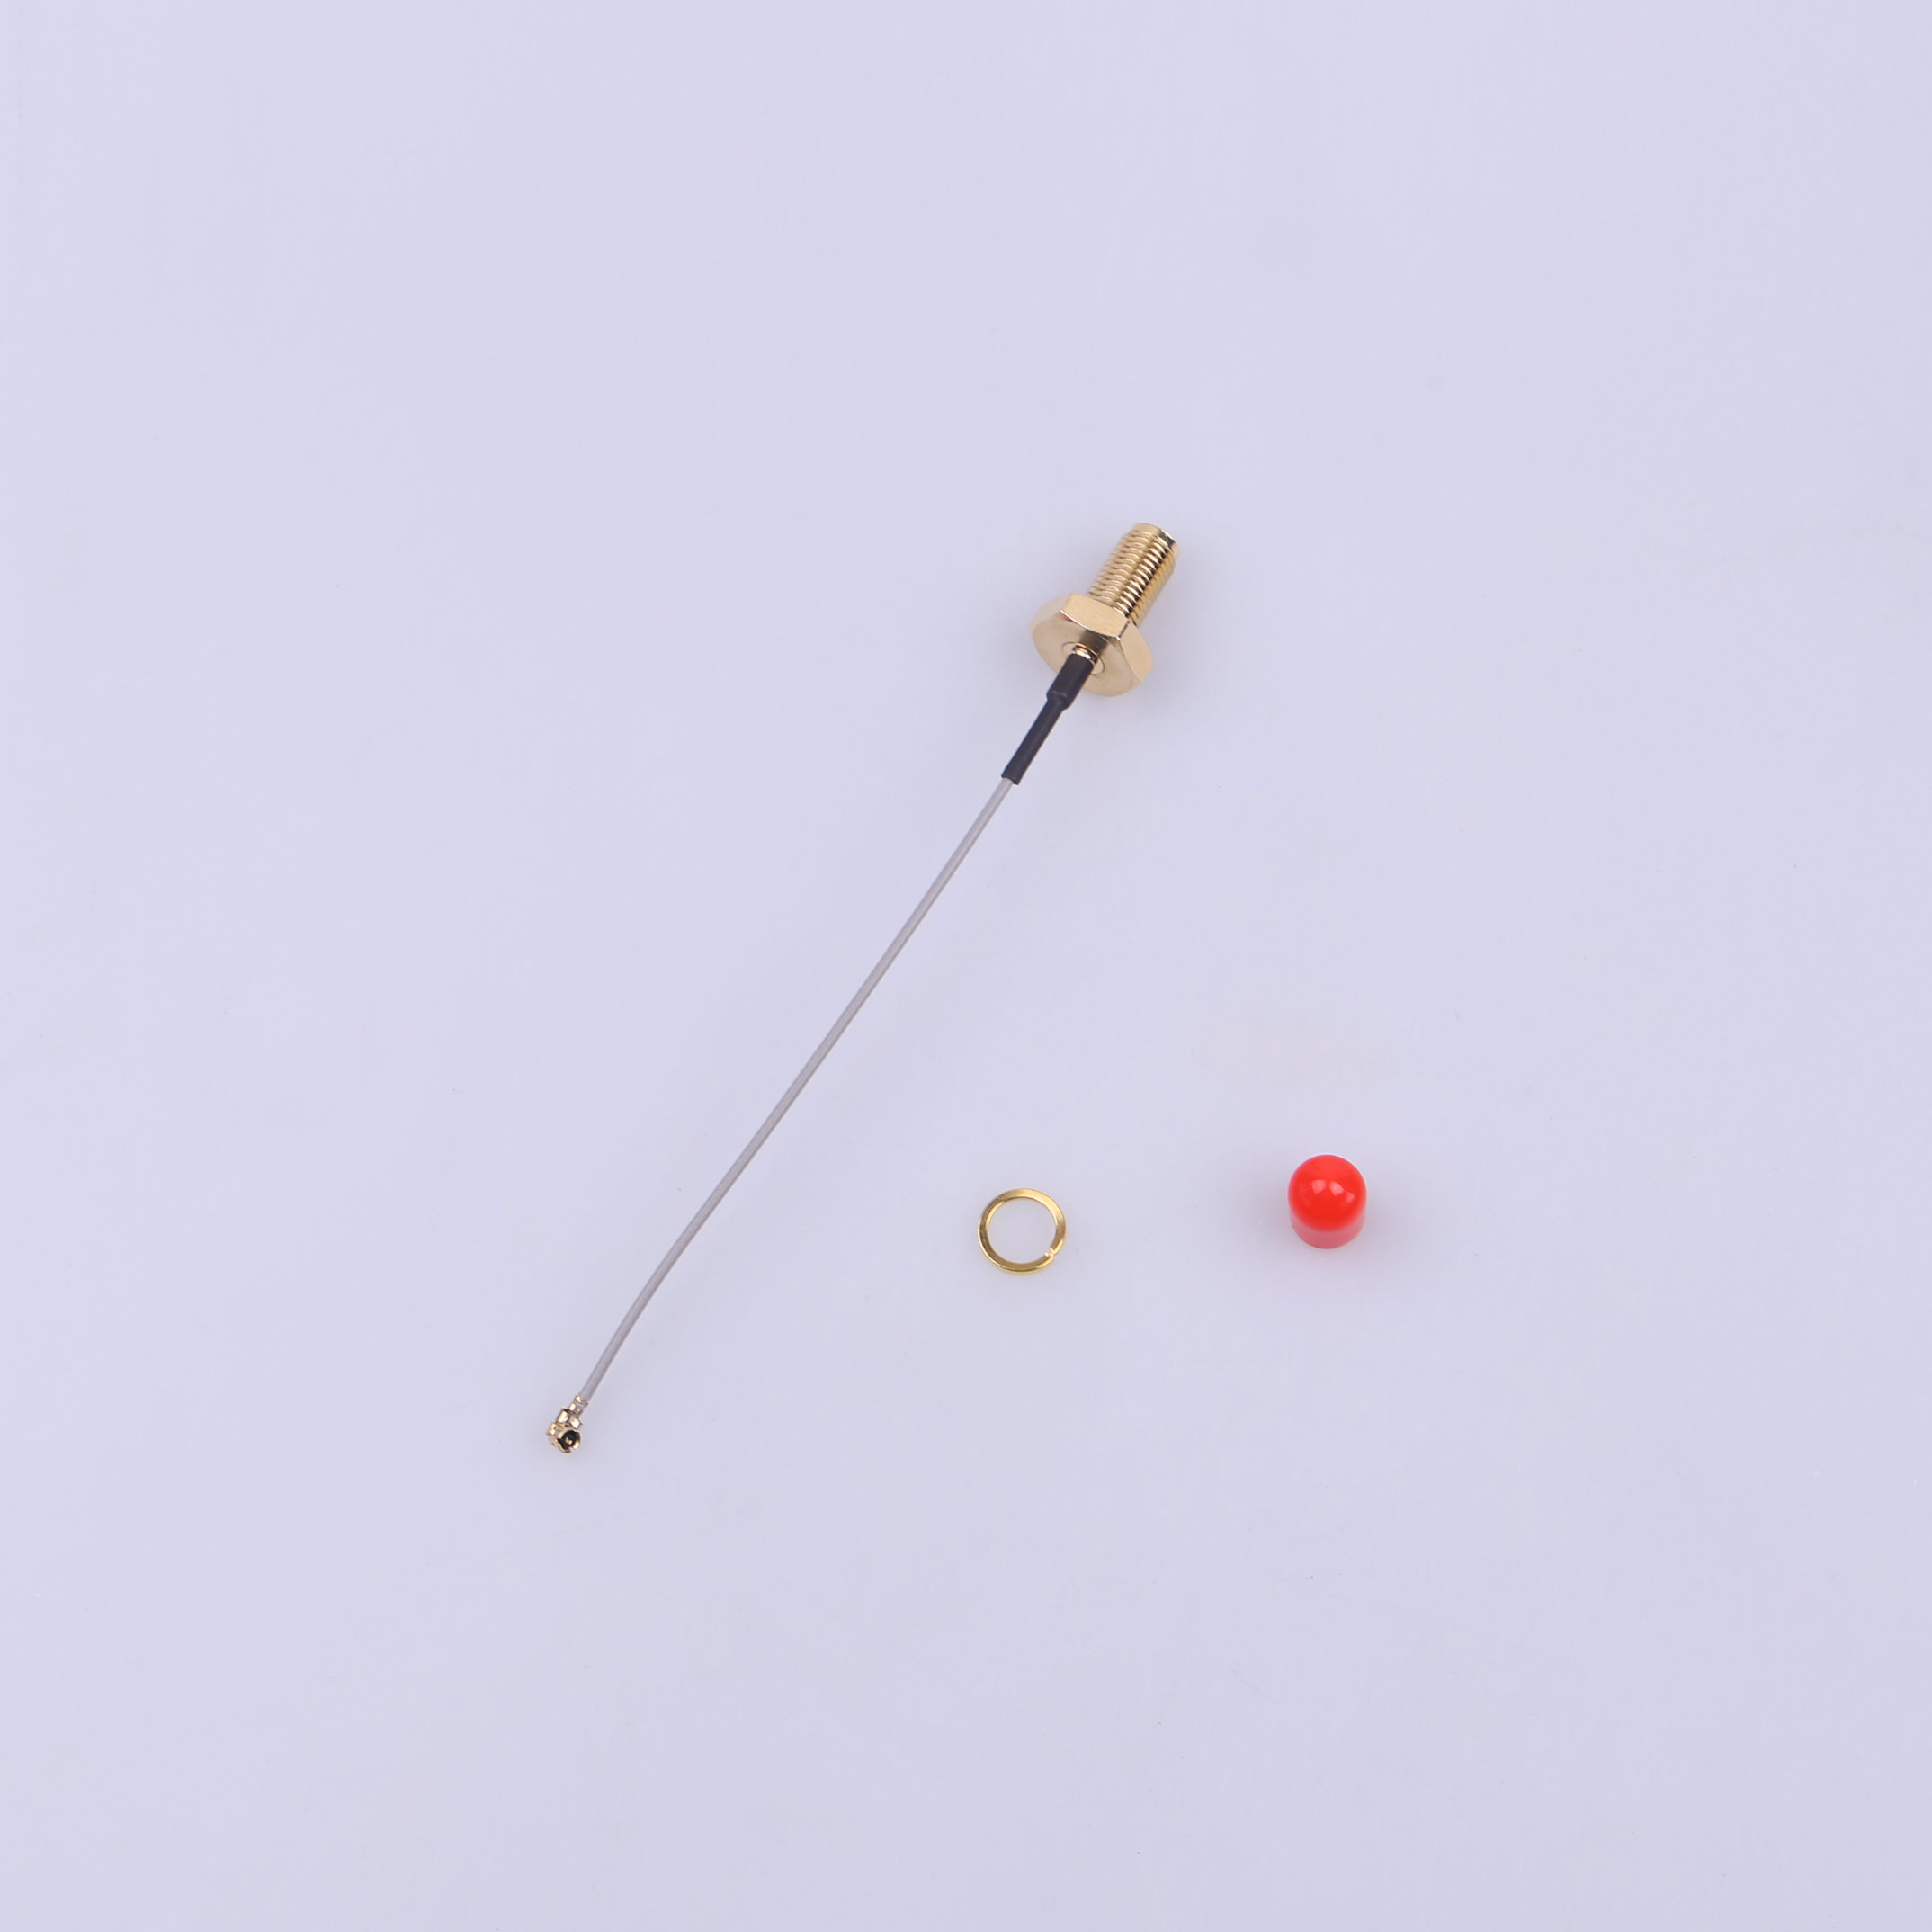 Kinghelm Coaxial connector IPEX to SMA antenna adapter cable welded I-PEX 1.13 terminal gold plating SMA split type With 11mm screw